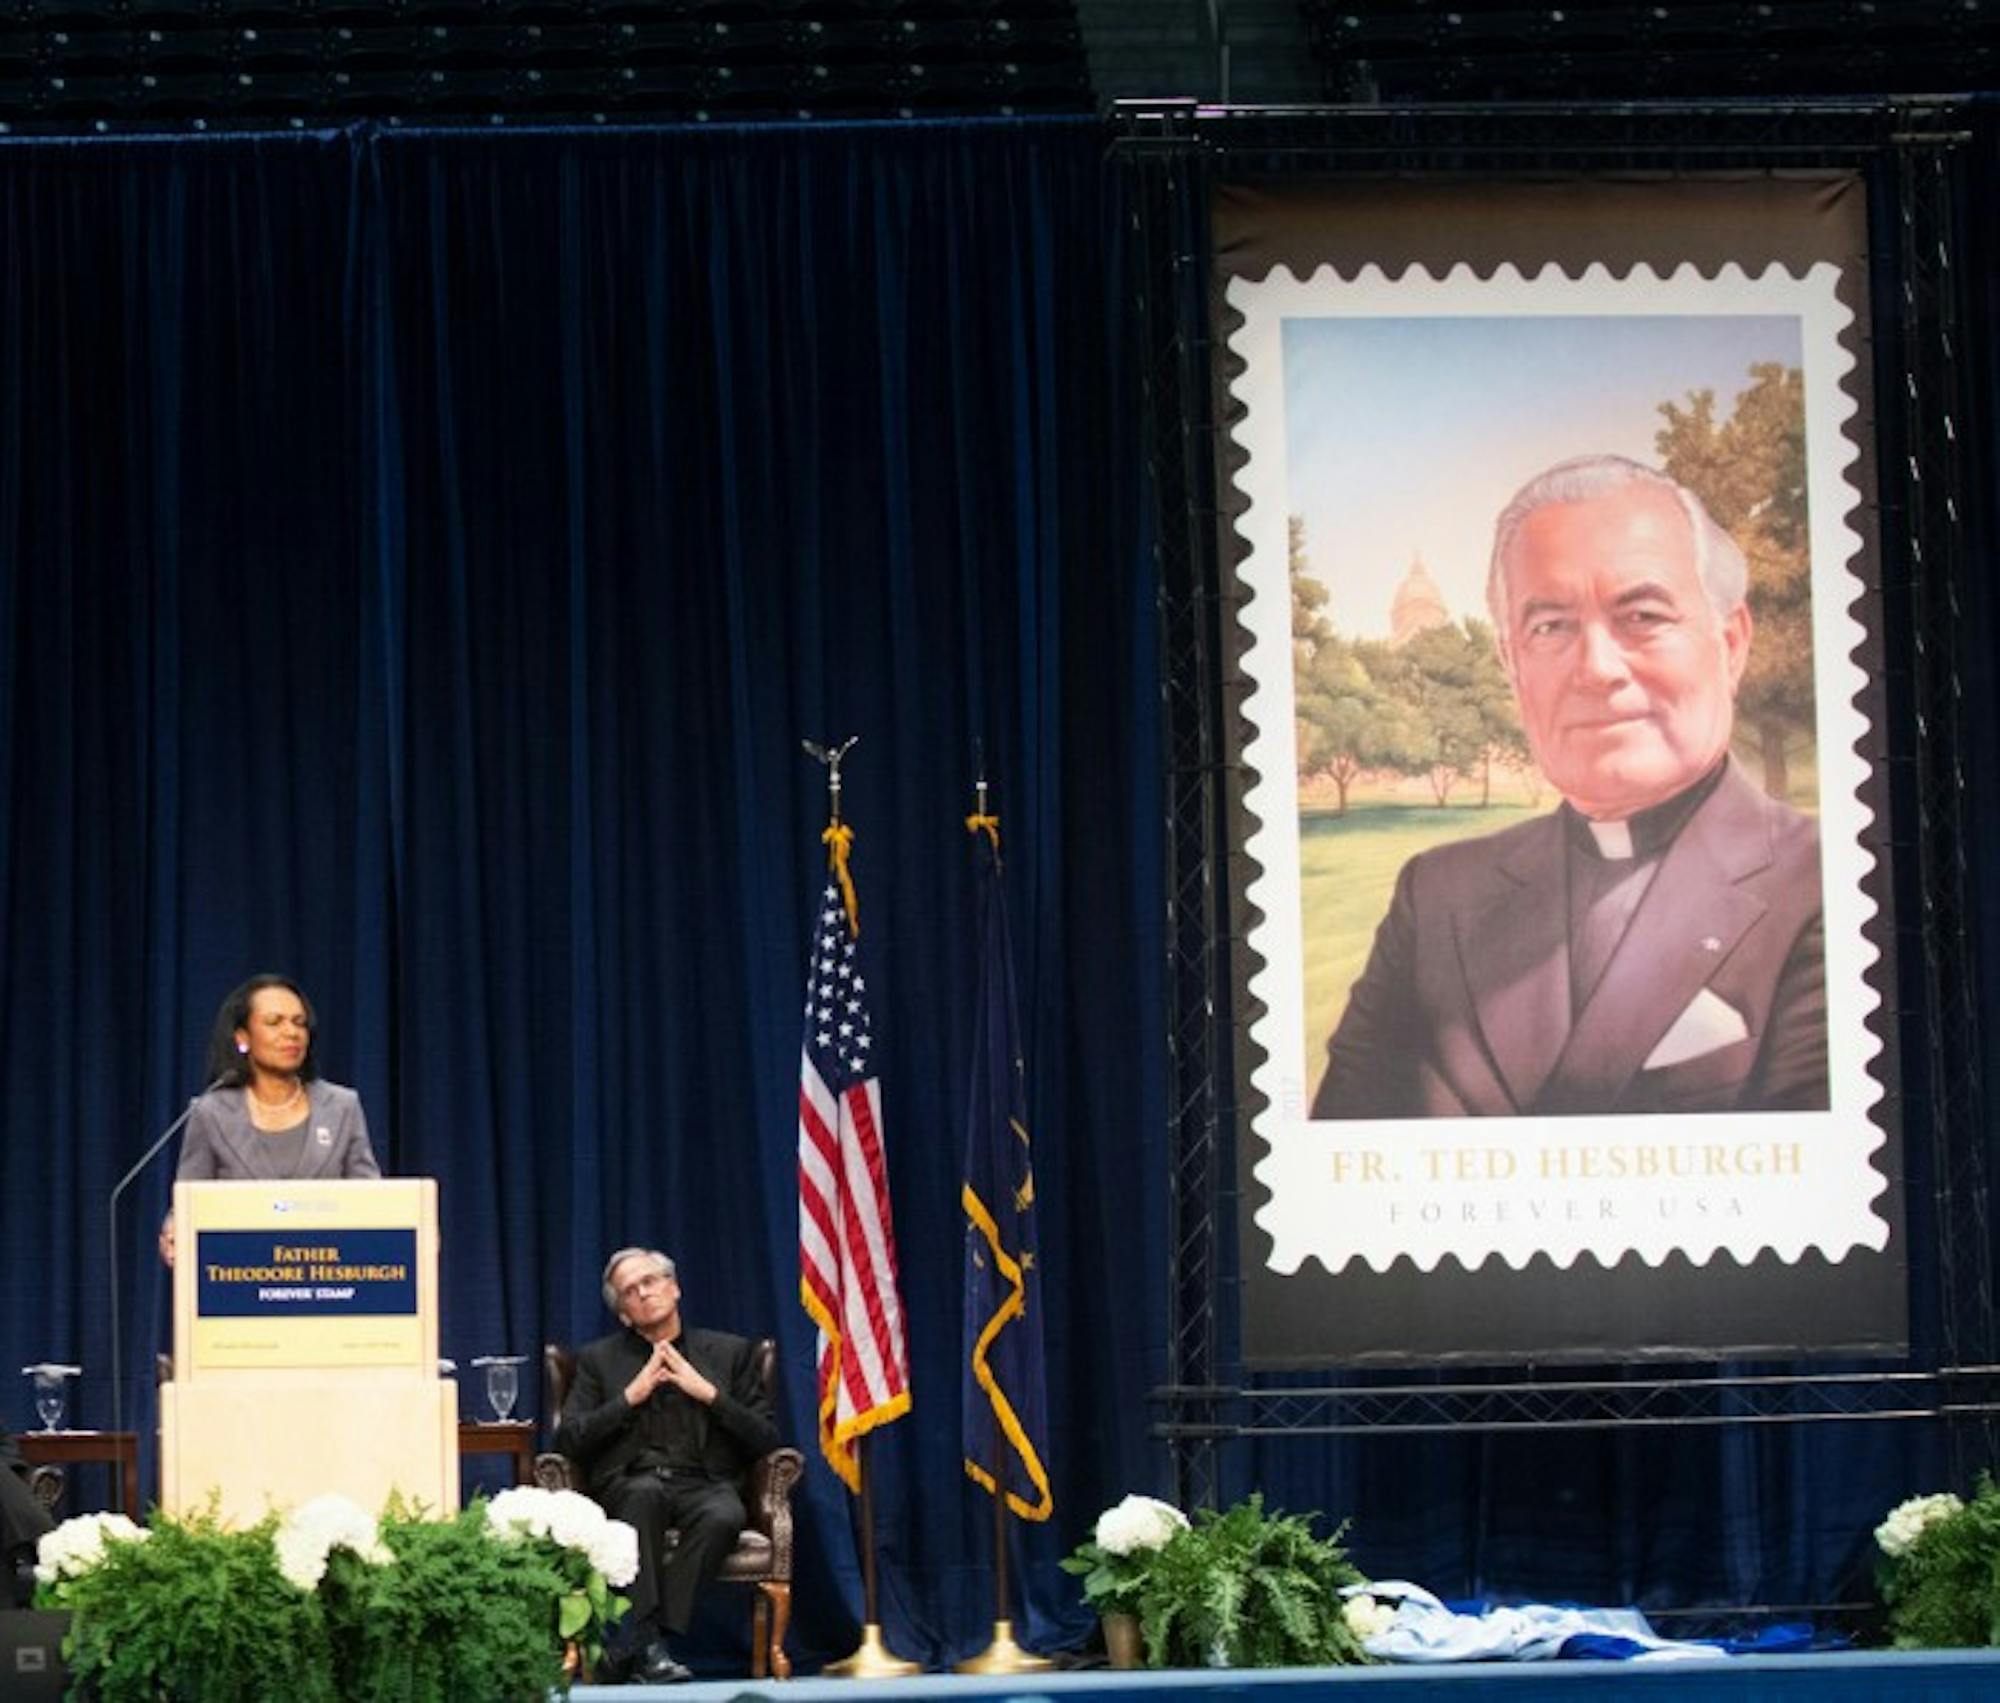 Former Secretary of State Condoleezza Rice speaks at a ceremony unveiling University President Emeritus Fr. Theodore Hesburgh's stamp on Friday in the Purcell Pavillion.